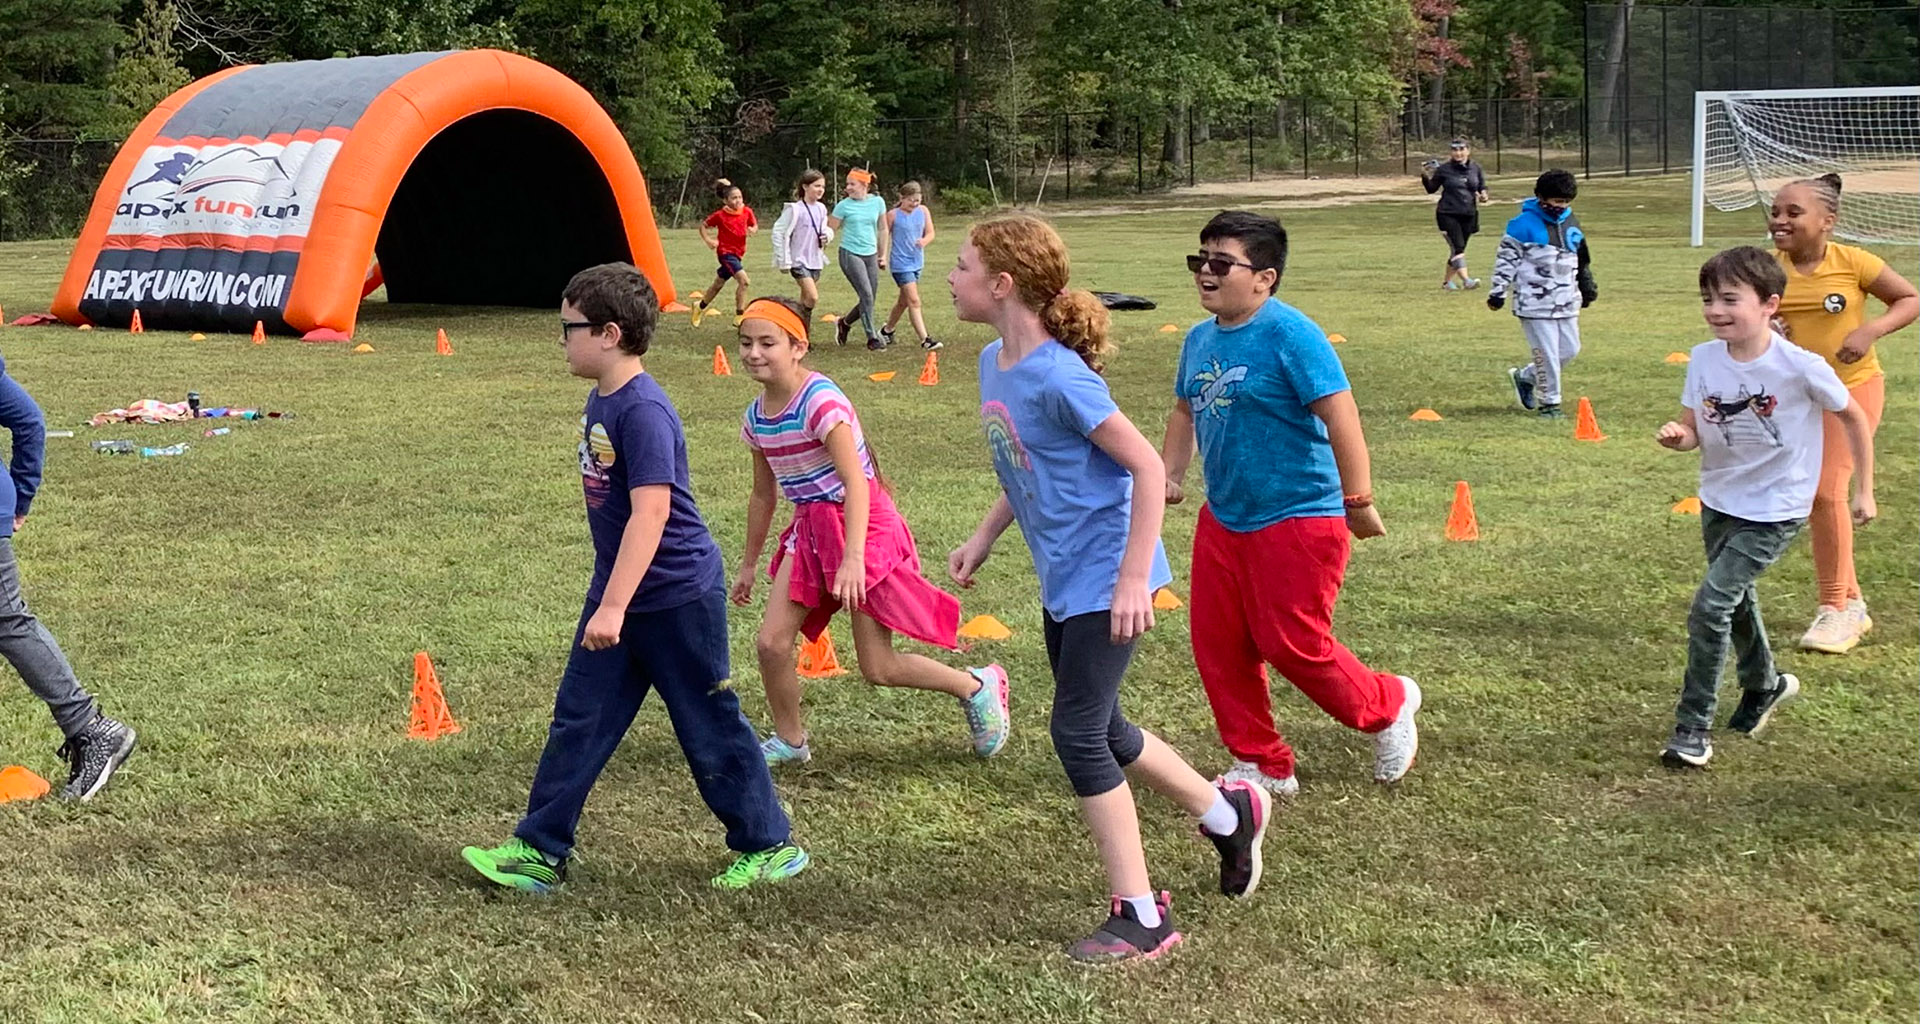 Students running outside during field day.